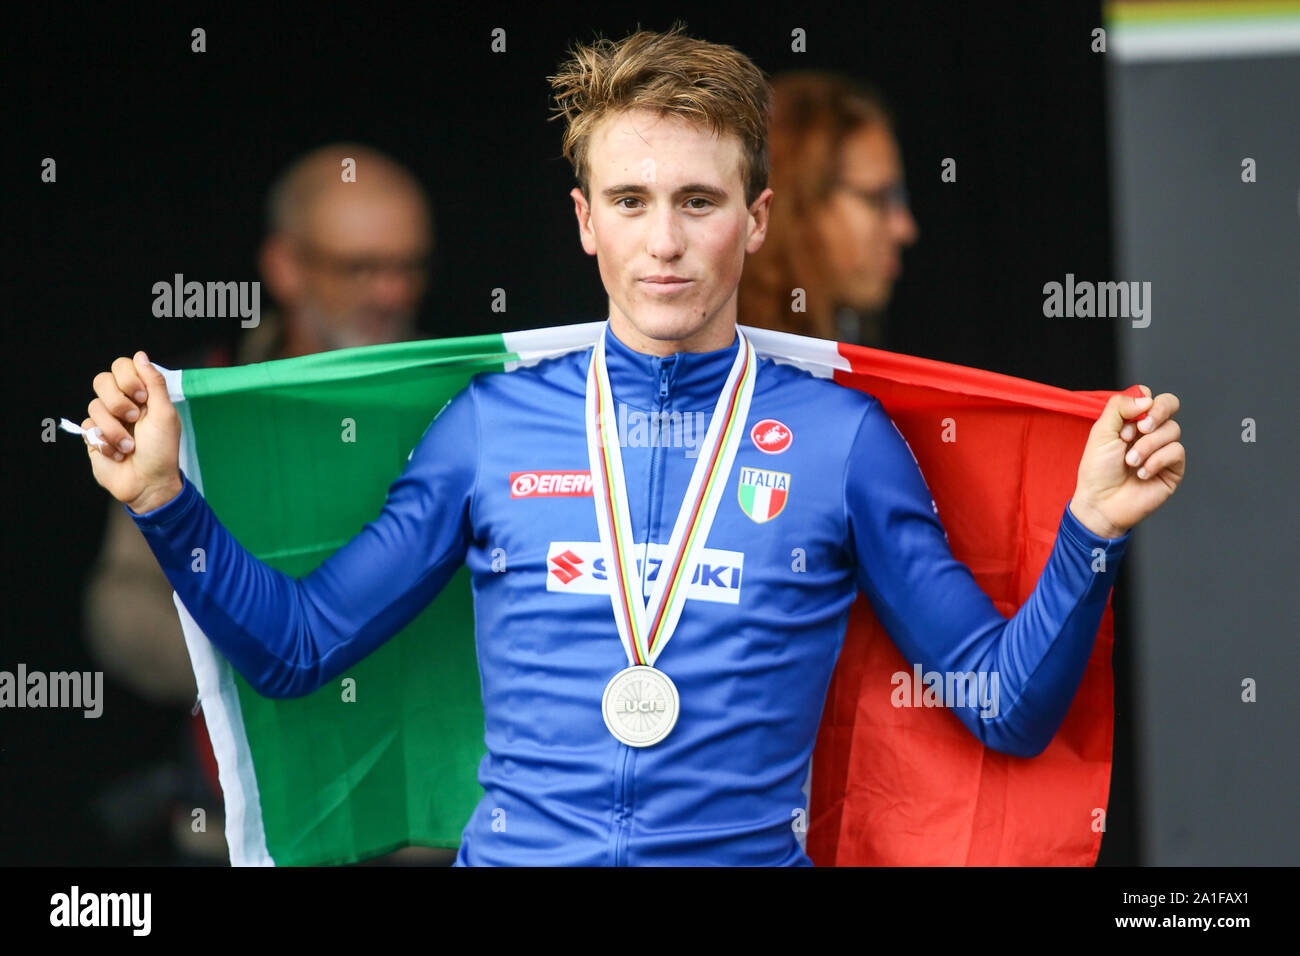 Harrogate, UK. 26th September 2019. Alessio Martinelli  of Italy takes silver in the 2019 UCI Road World Championships Mens Junior Road Race. September 26, 2019 Credit Dan-Cooke/Alamy Live News Stock Photo